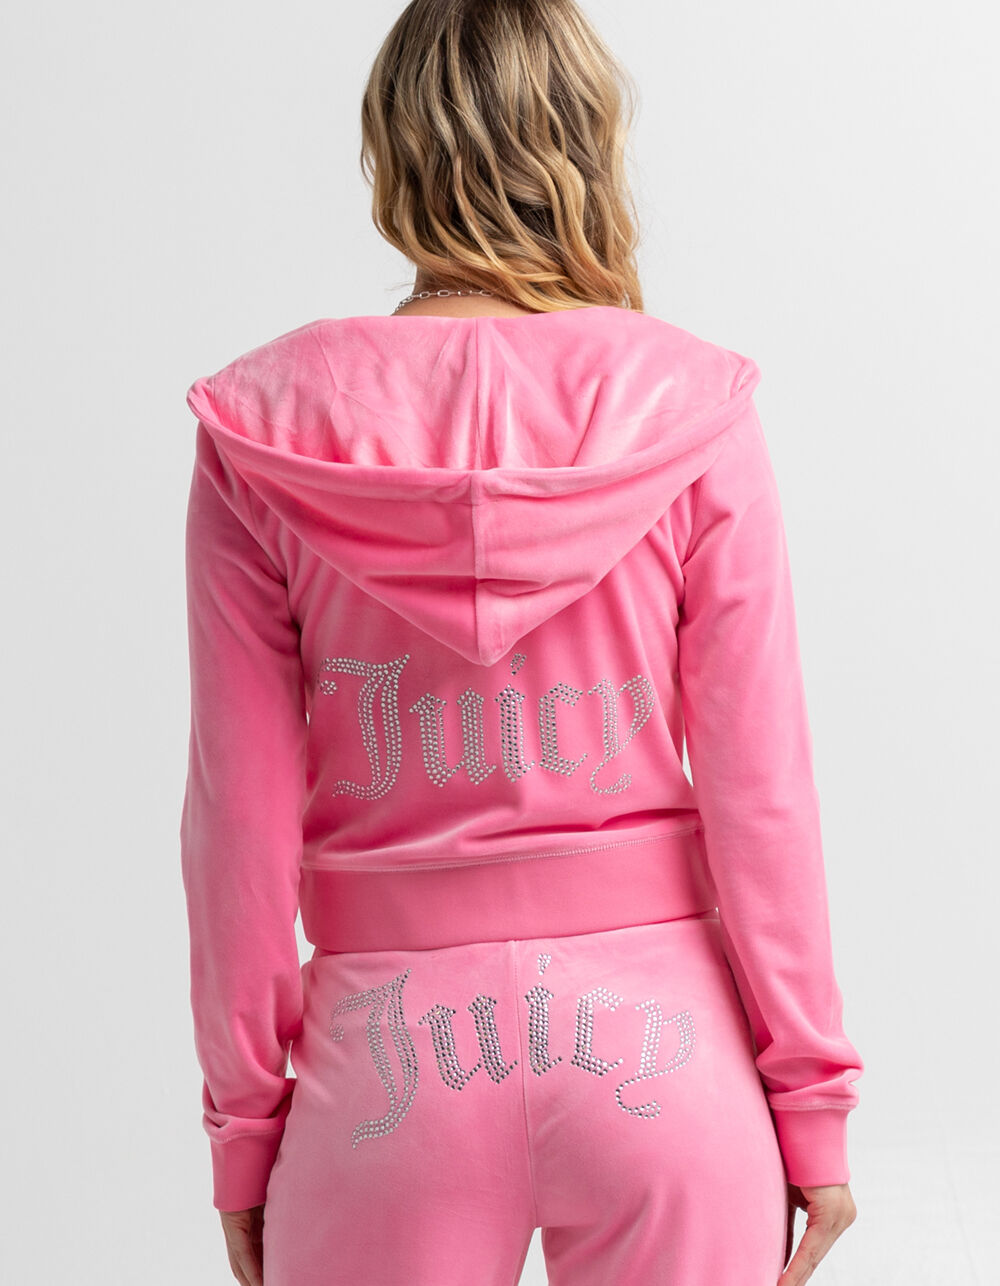 JUICY COUTURE Classic Bling Womens Zip Up Velour Hoodie - HOT PINK | Tillys